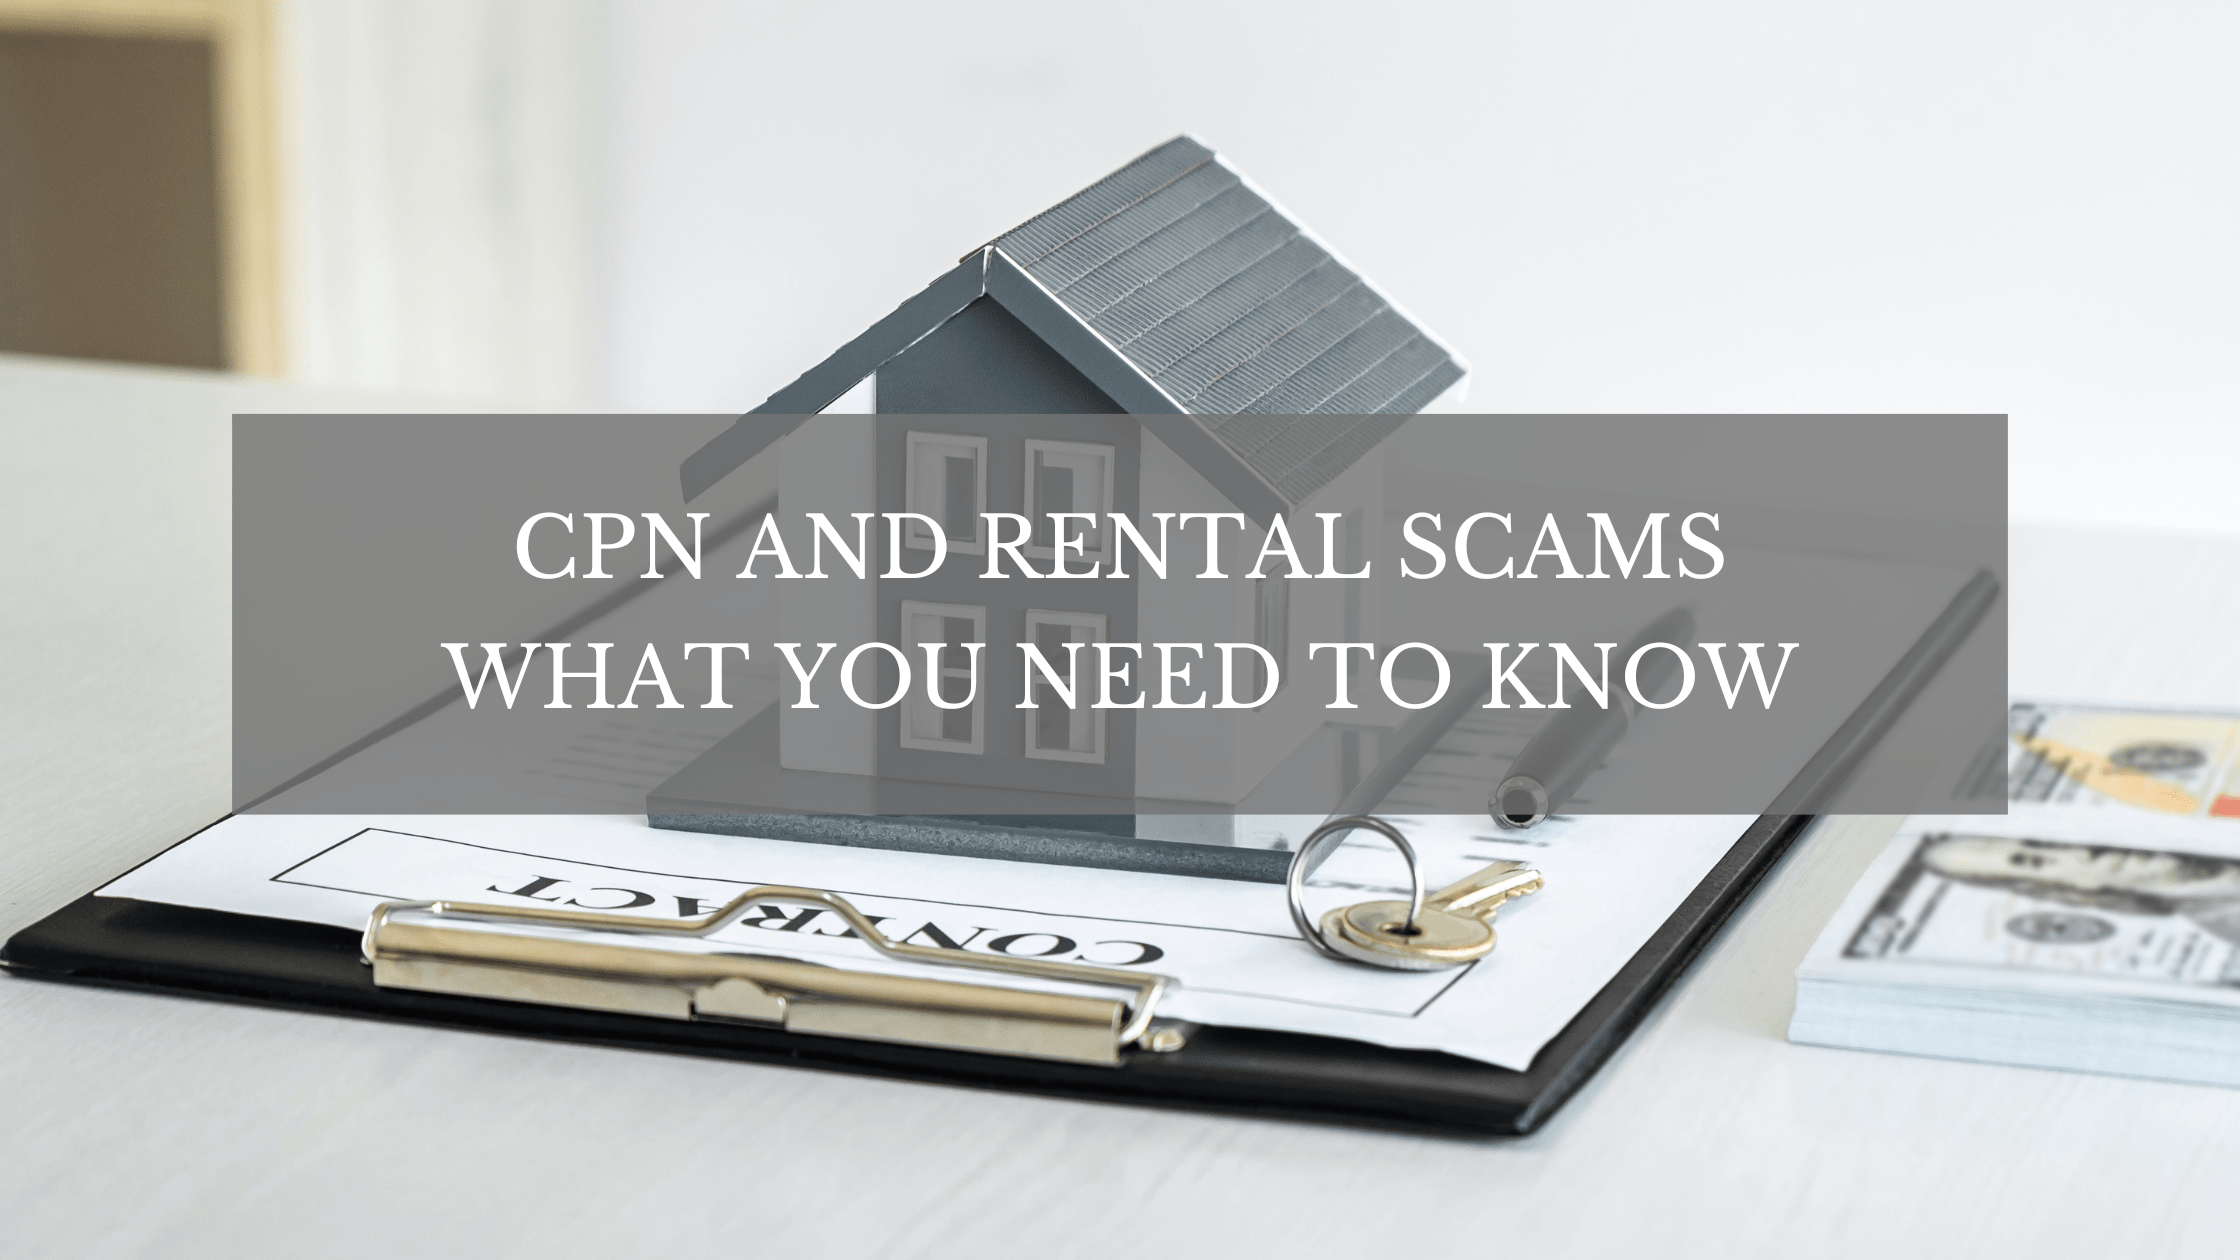 CPNs and Rental Scams: What You Need to Know